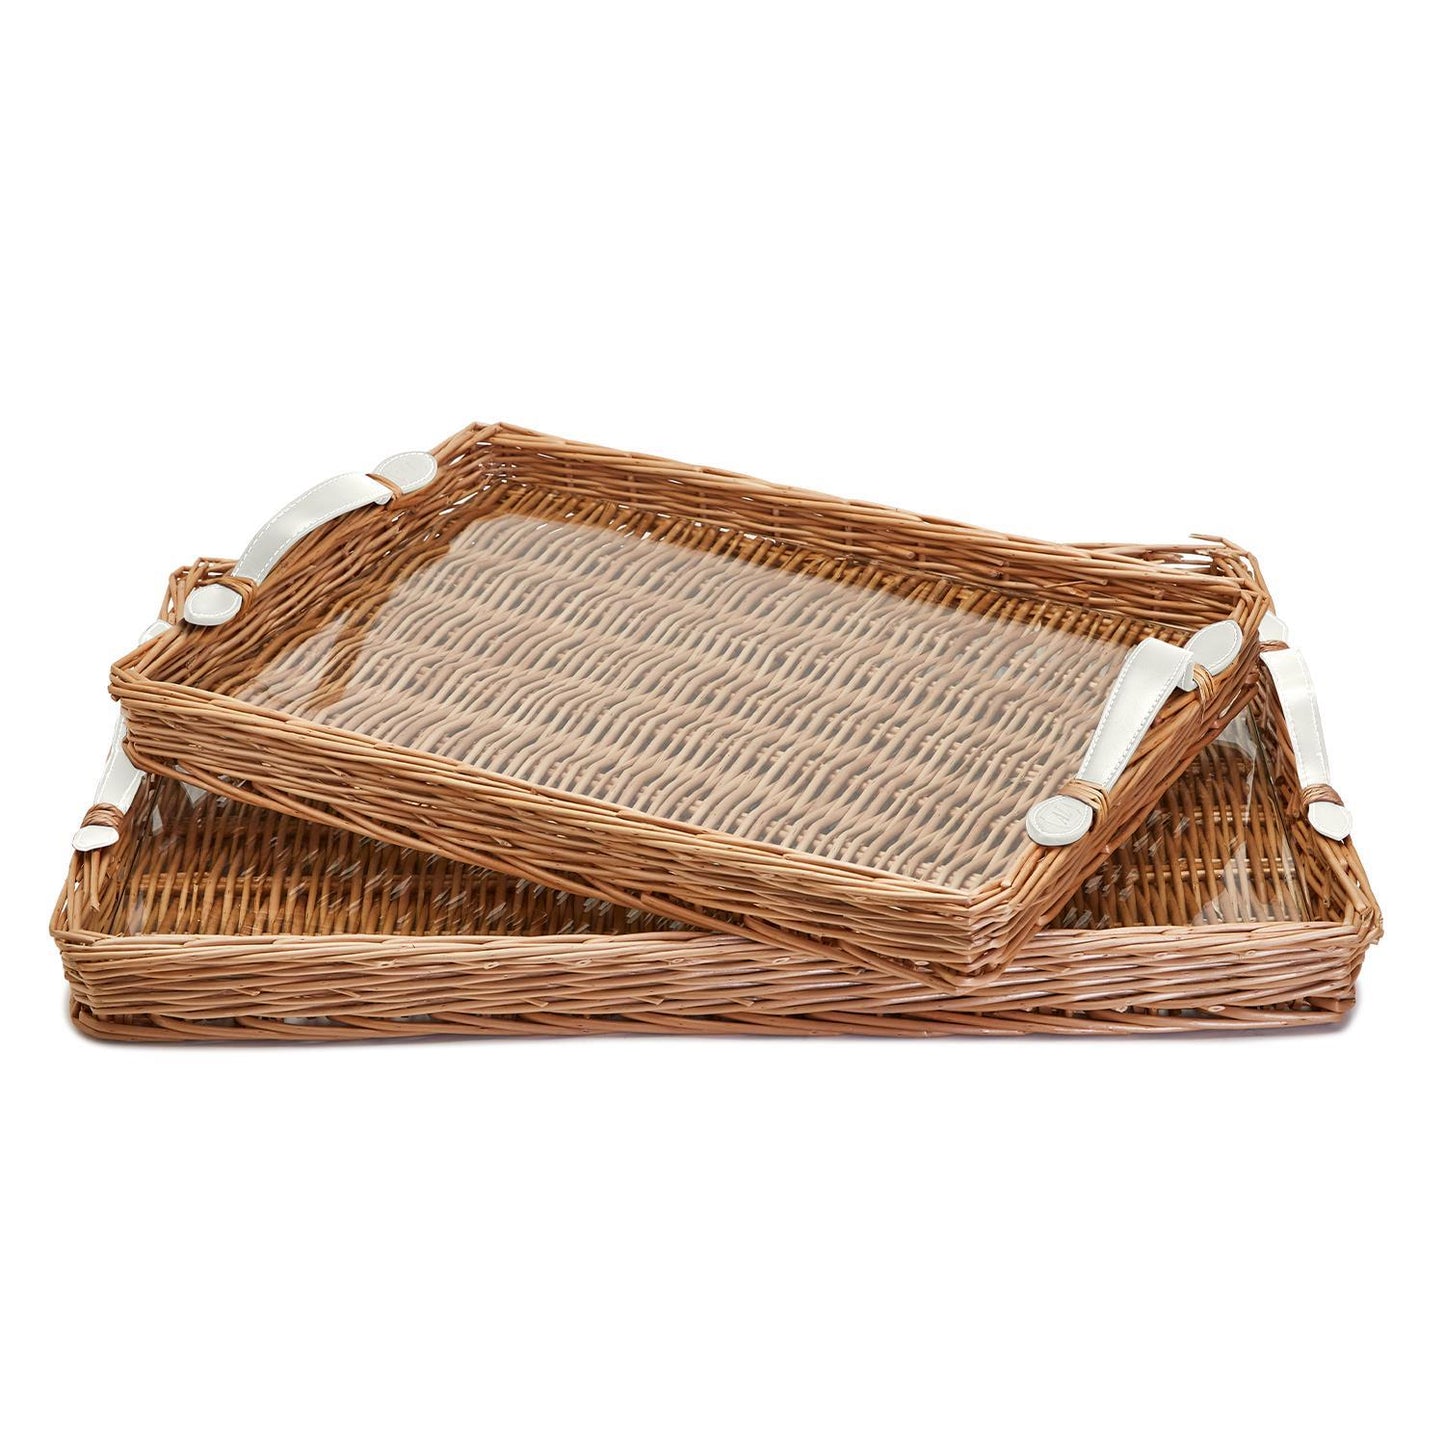 Two's Company Set of 2 Wicker Trays with White Handles